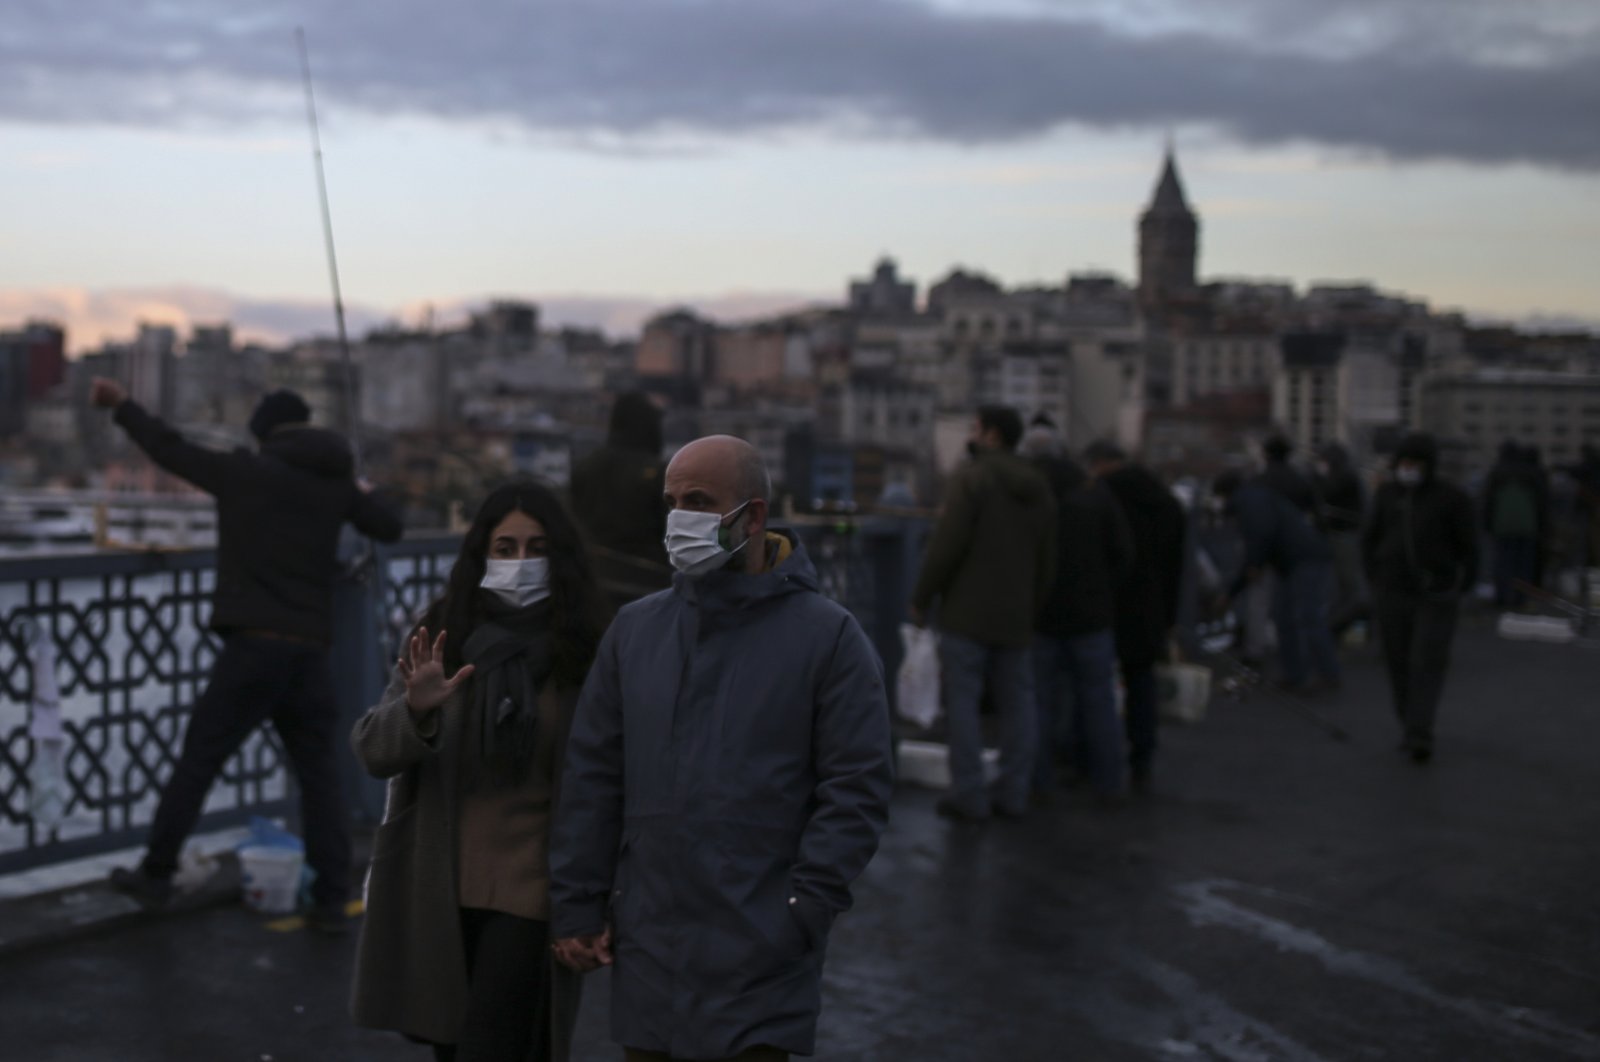 People, wearing protective masks to help curb the spread of the coronavirus, walk on the Galata Bridge over the Golden Horn in Istanbul, Monday, Dec. 21, 2020. (AP)